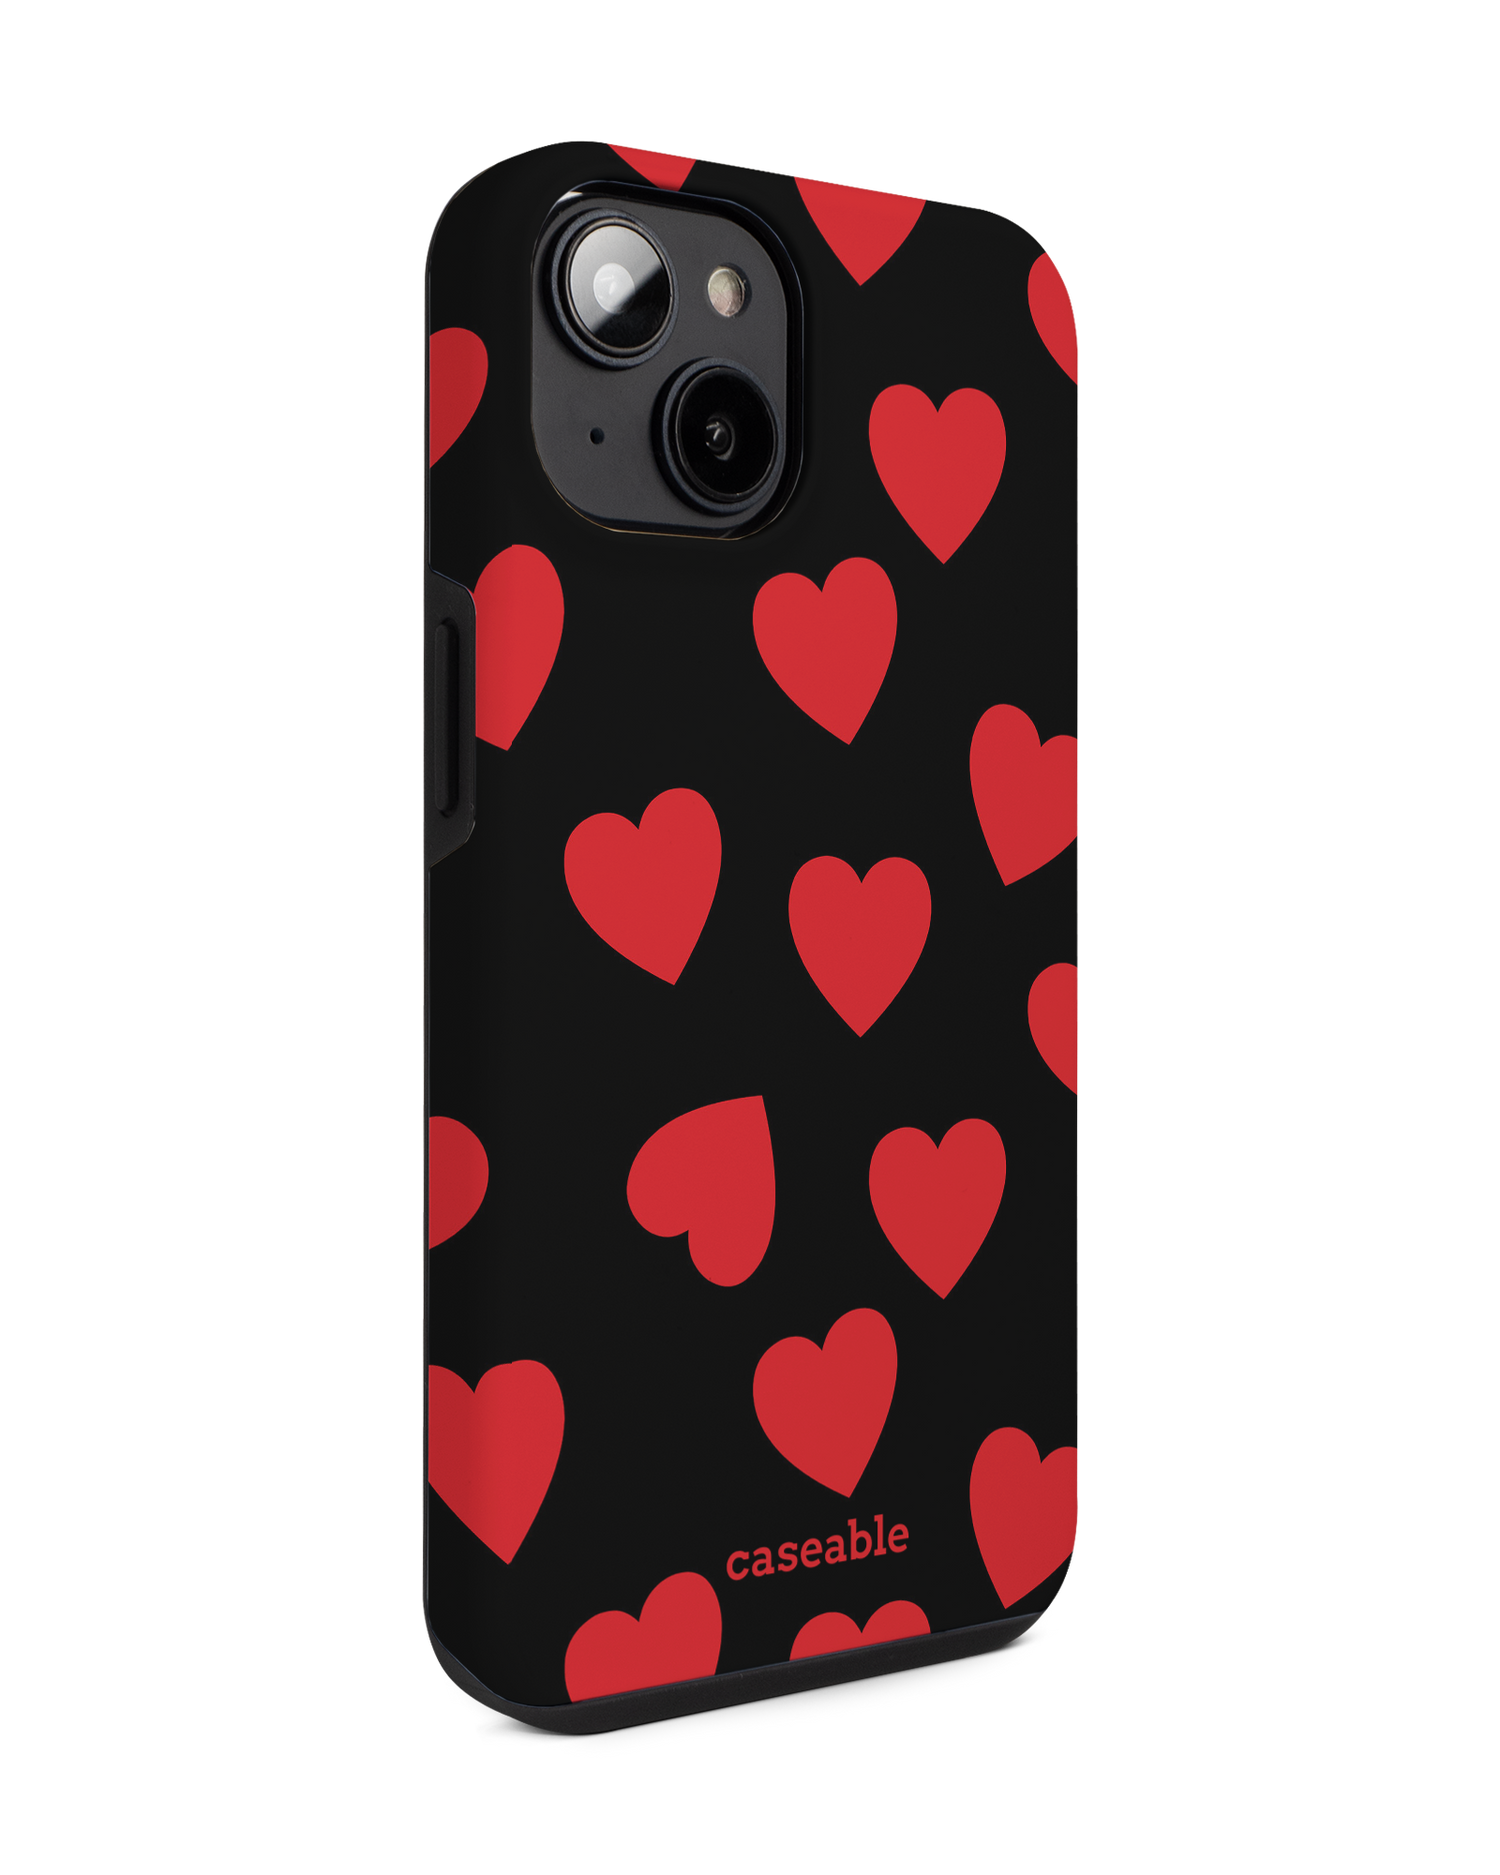 Repeating Hearts Premium Phone for Apple iPhone 14: View from the left side